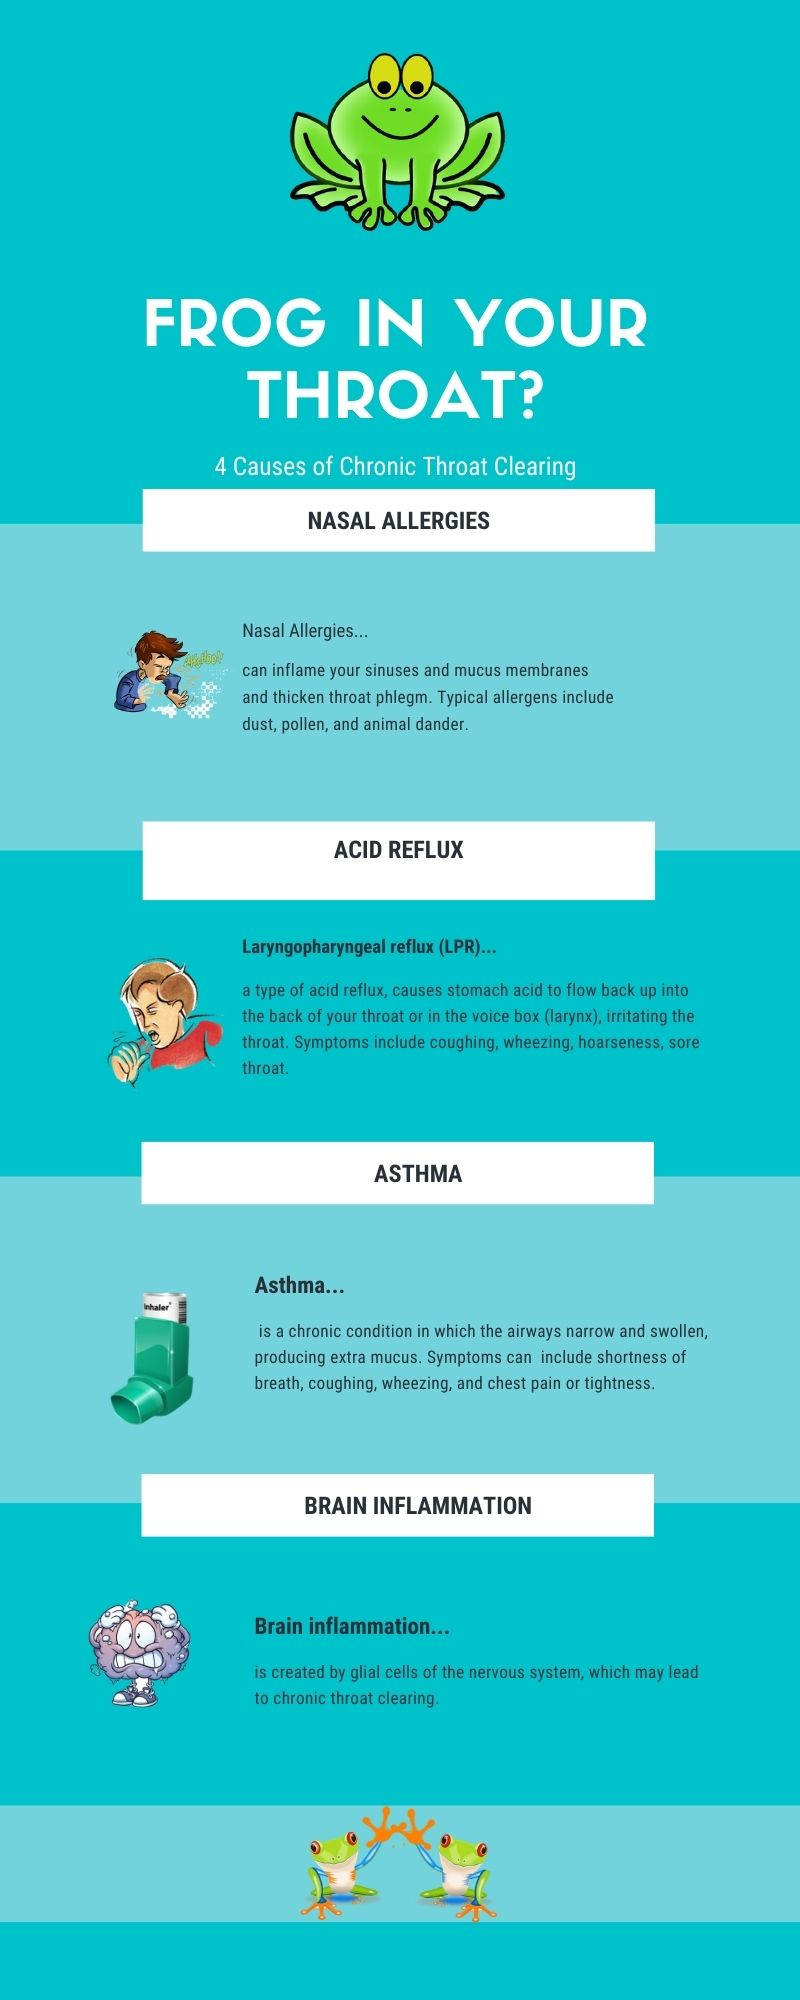 An infographic with cartoon images illustrating causes of chronic throat clearing with explanatory text described below.